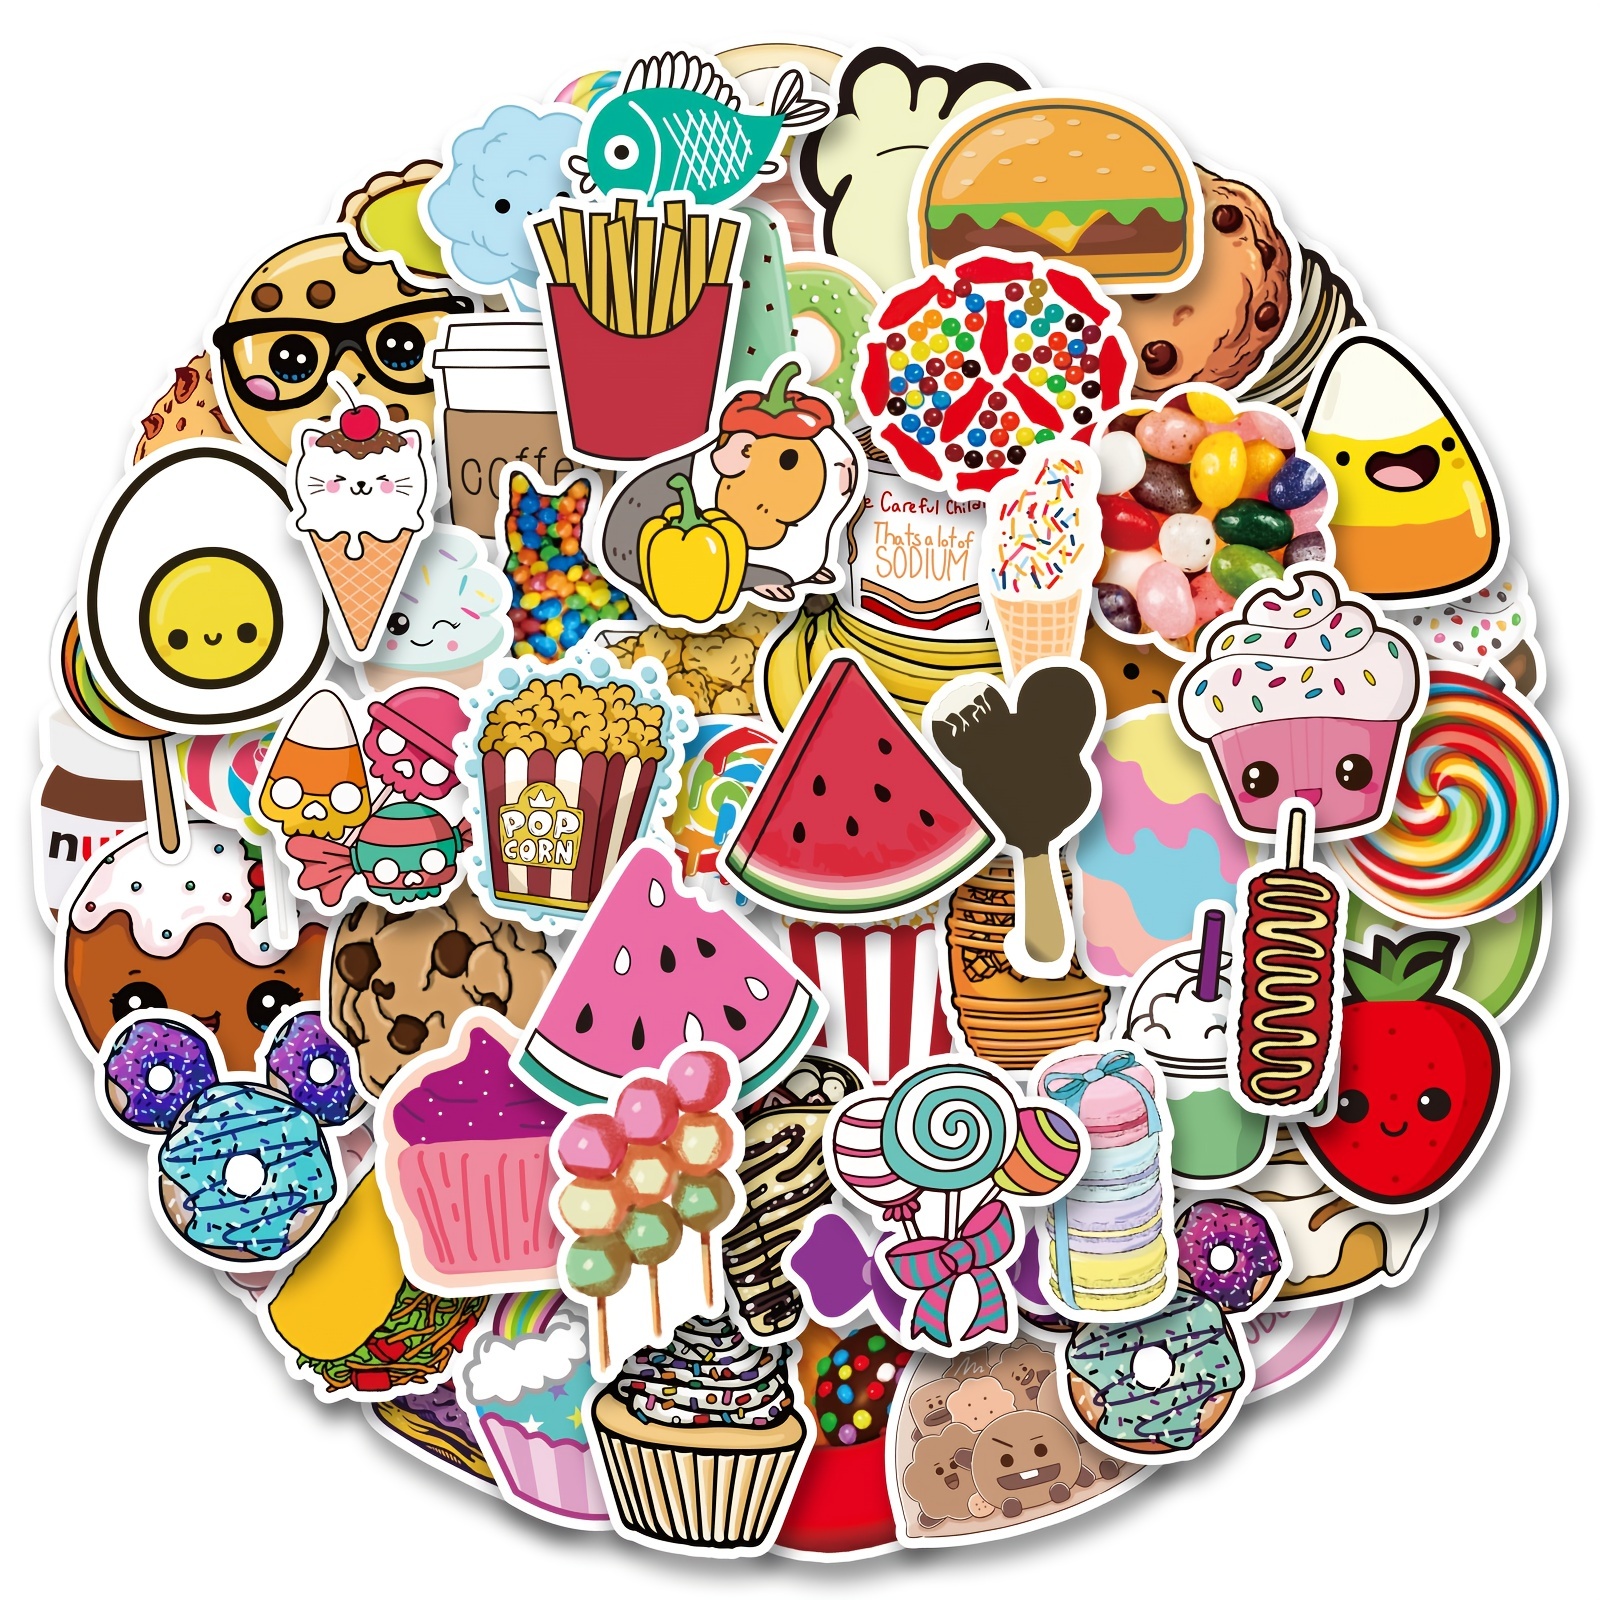 

100 Pcs Food Stickers, Fruit Decal Stickers, Food Stickers For, Vinyl Waterproof Stickers For Laptop, Bumper, Water Bottles, Computer, Phone, Hard Hat, Car Stickers And Decals